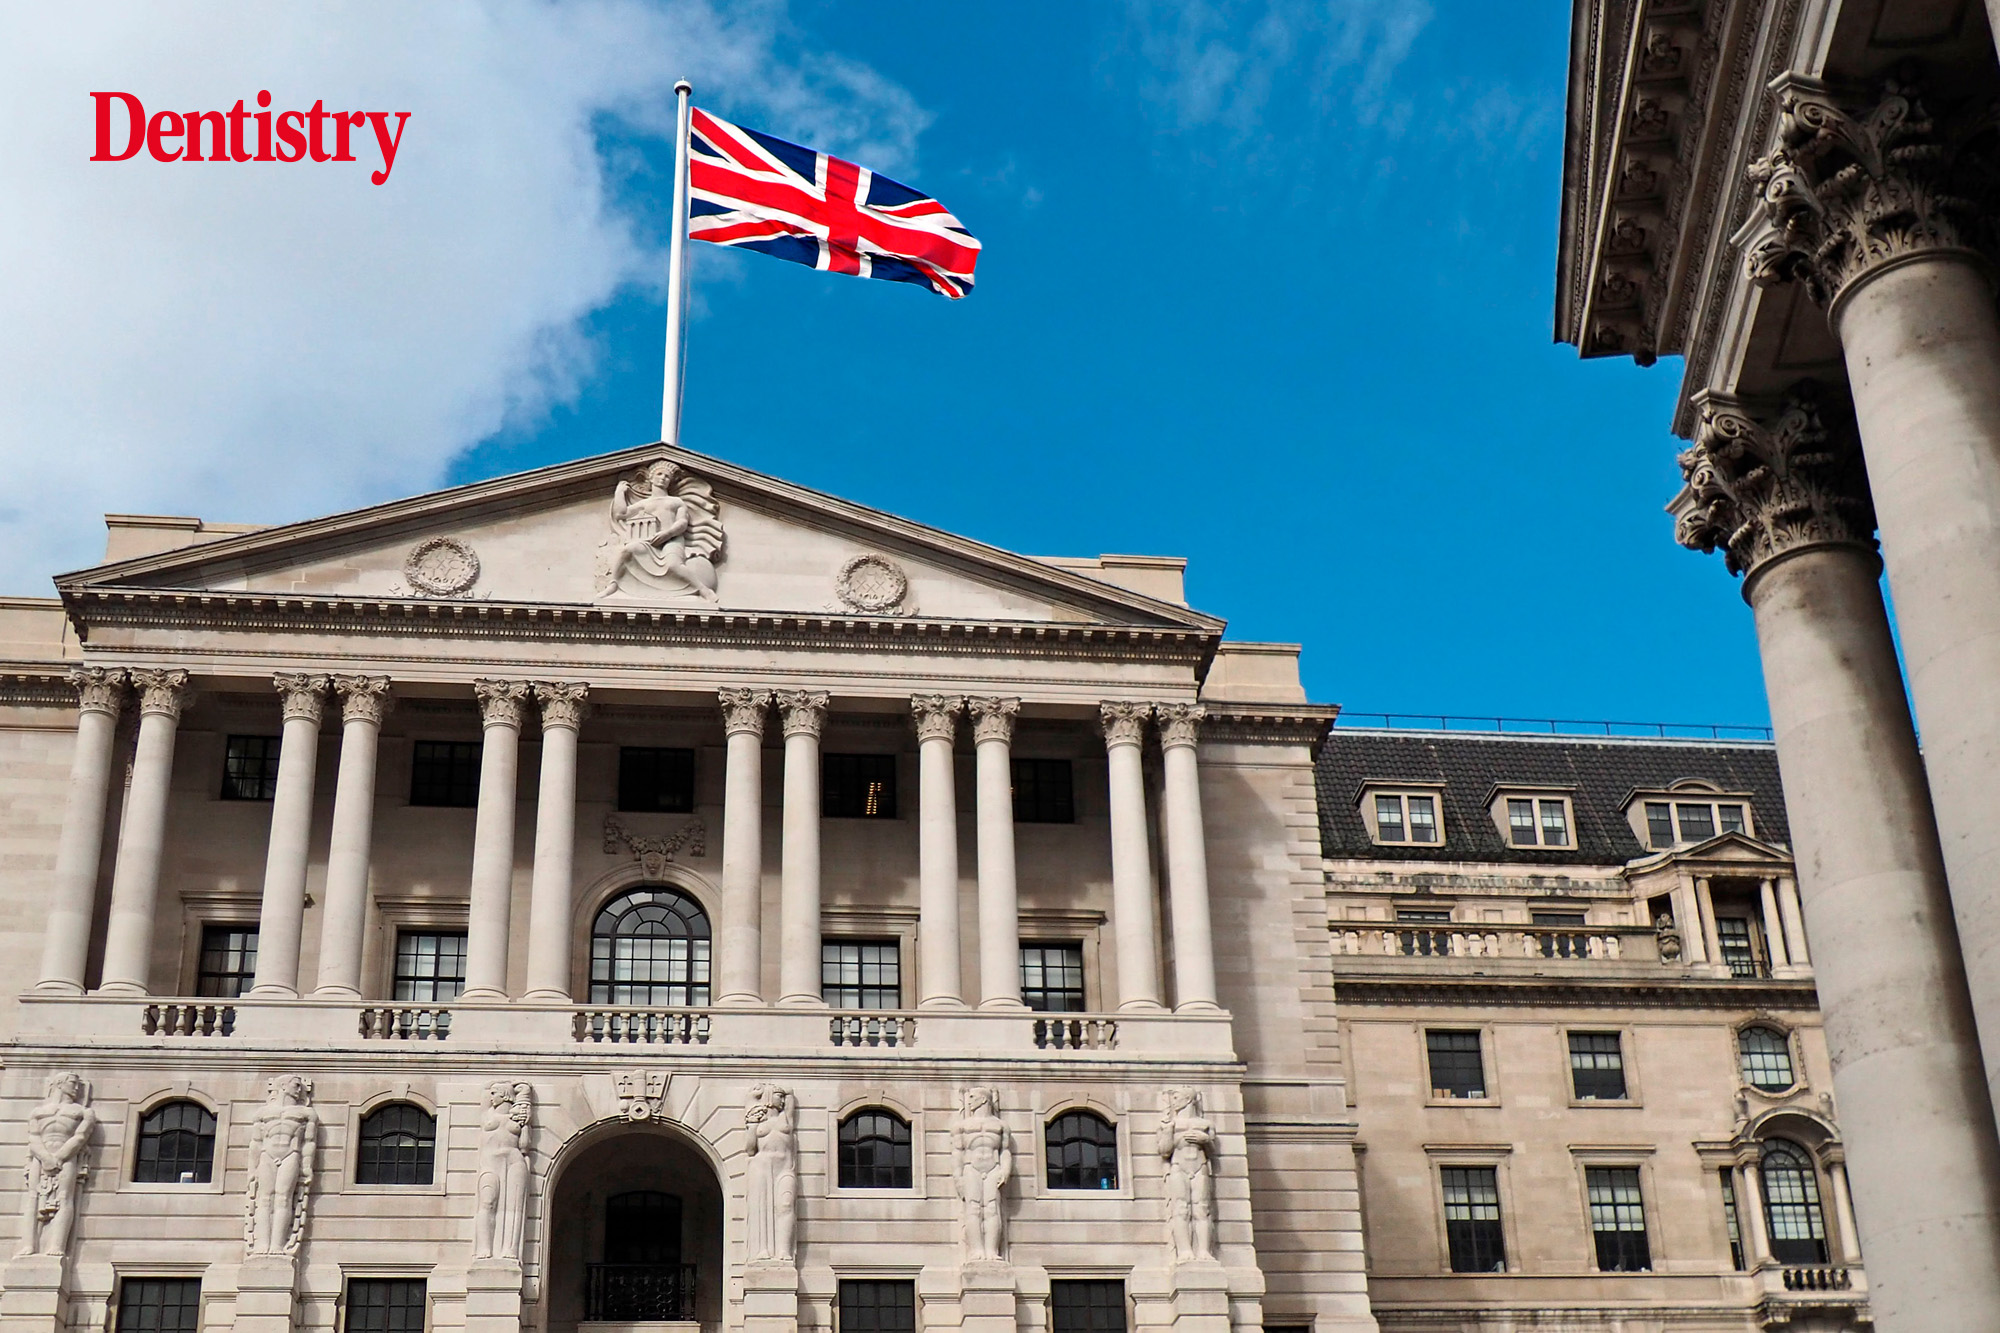 The Bank of England has just announced a 0.5% increase in the interest rate, reaching a 14-year high of 2.25%. But what does this mean for dentistry?